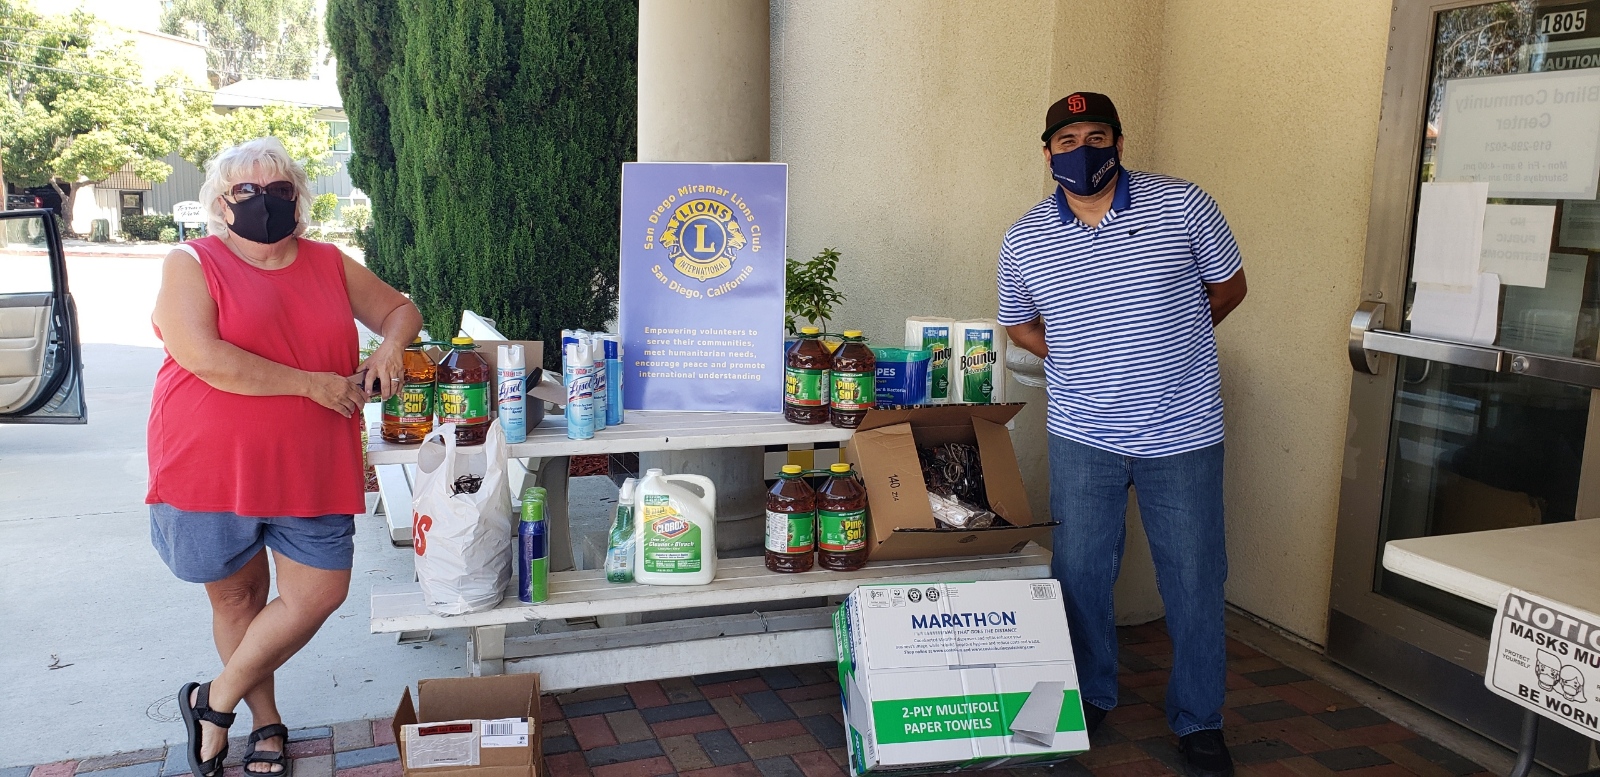 San Diego Lions Optometric Center Receives Needed Disinfectant & Cleaning Supplies Along With Donated Glasses